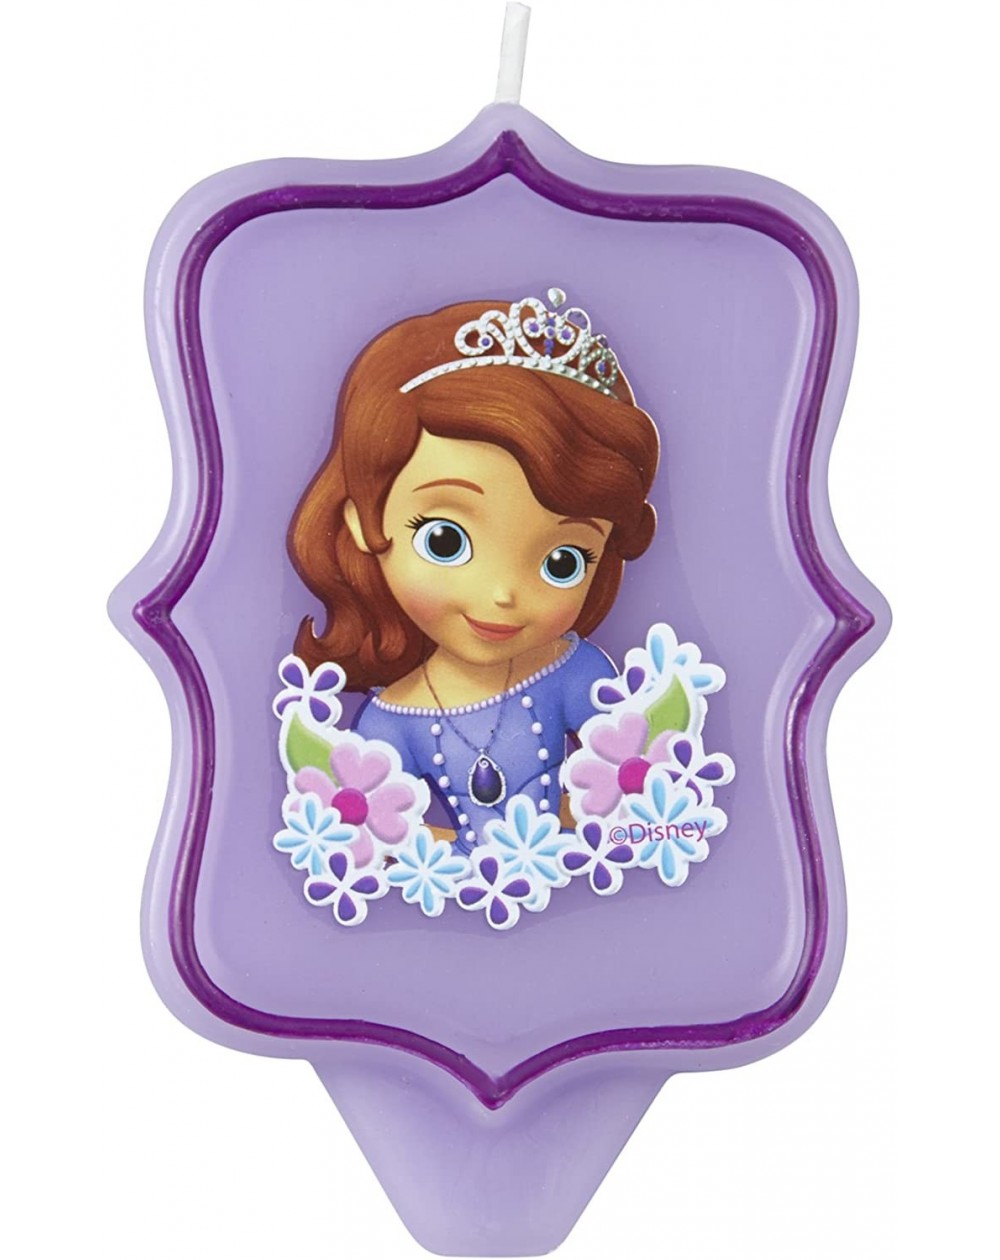 Cake Decorating Supplies Sofia The First Birthday Candle - CO11ORPKUUL $11.11